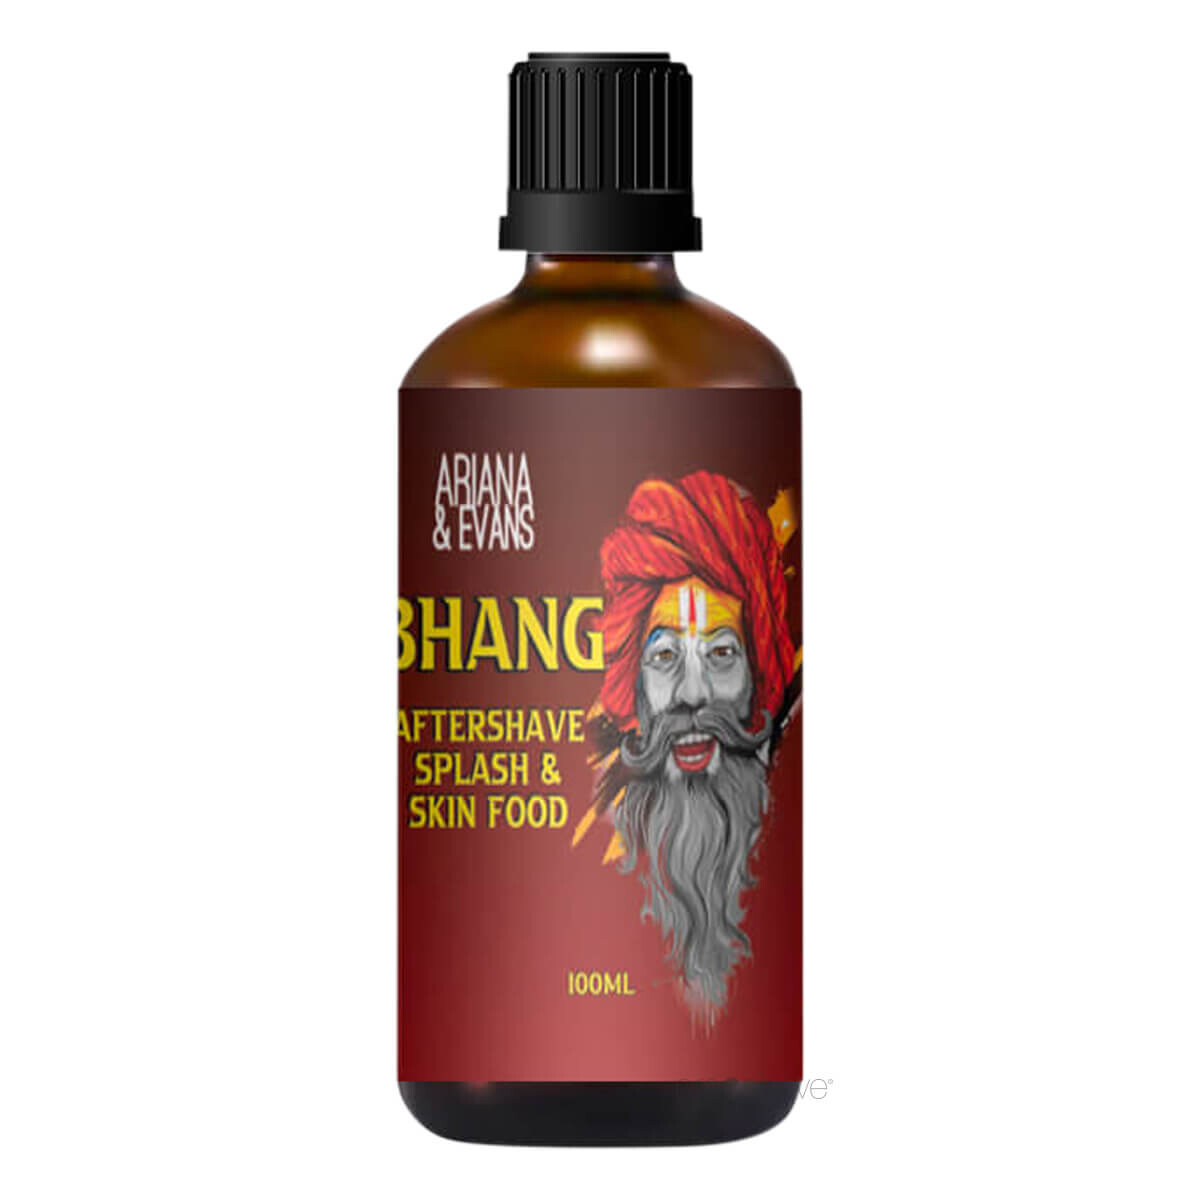 Se Ariana & Evans Aftershave, Bhang, 100 ml. hos Proshave